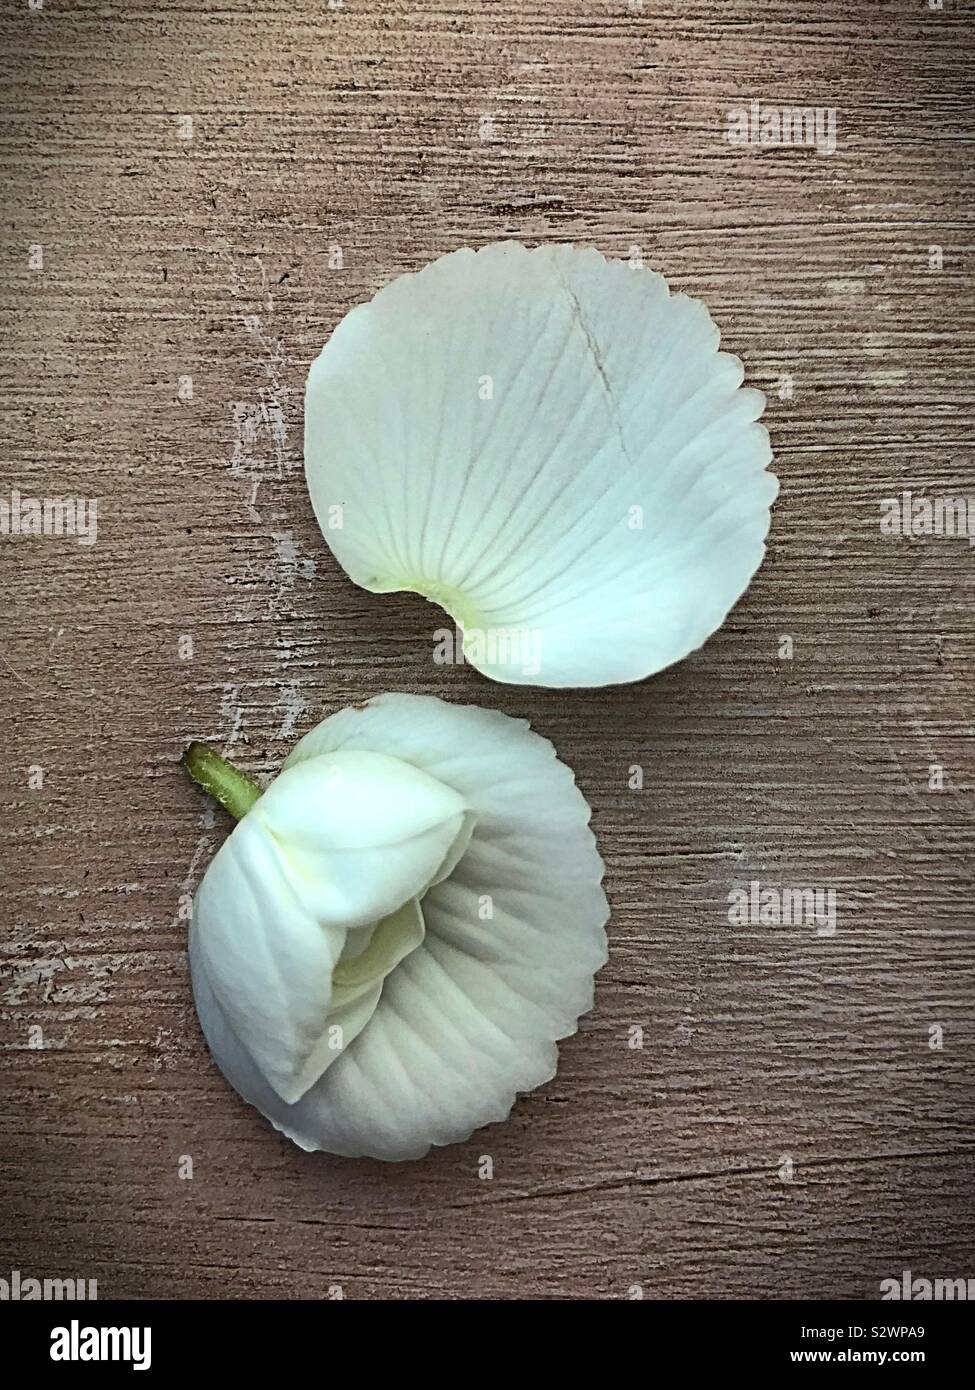 A white flower fallen off a begonia plant. Stock Photo